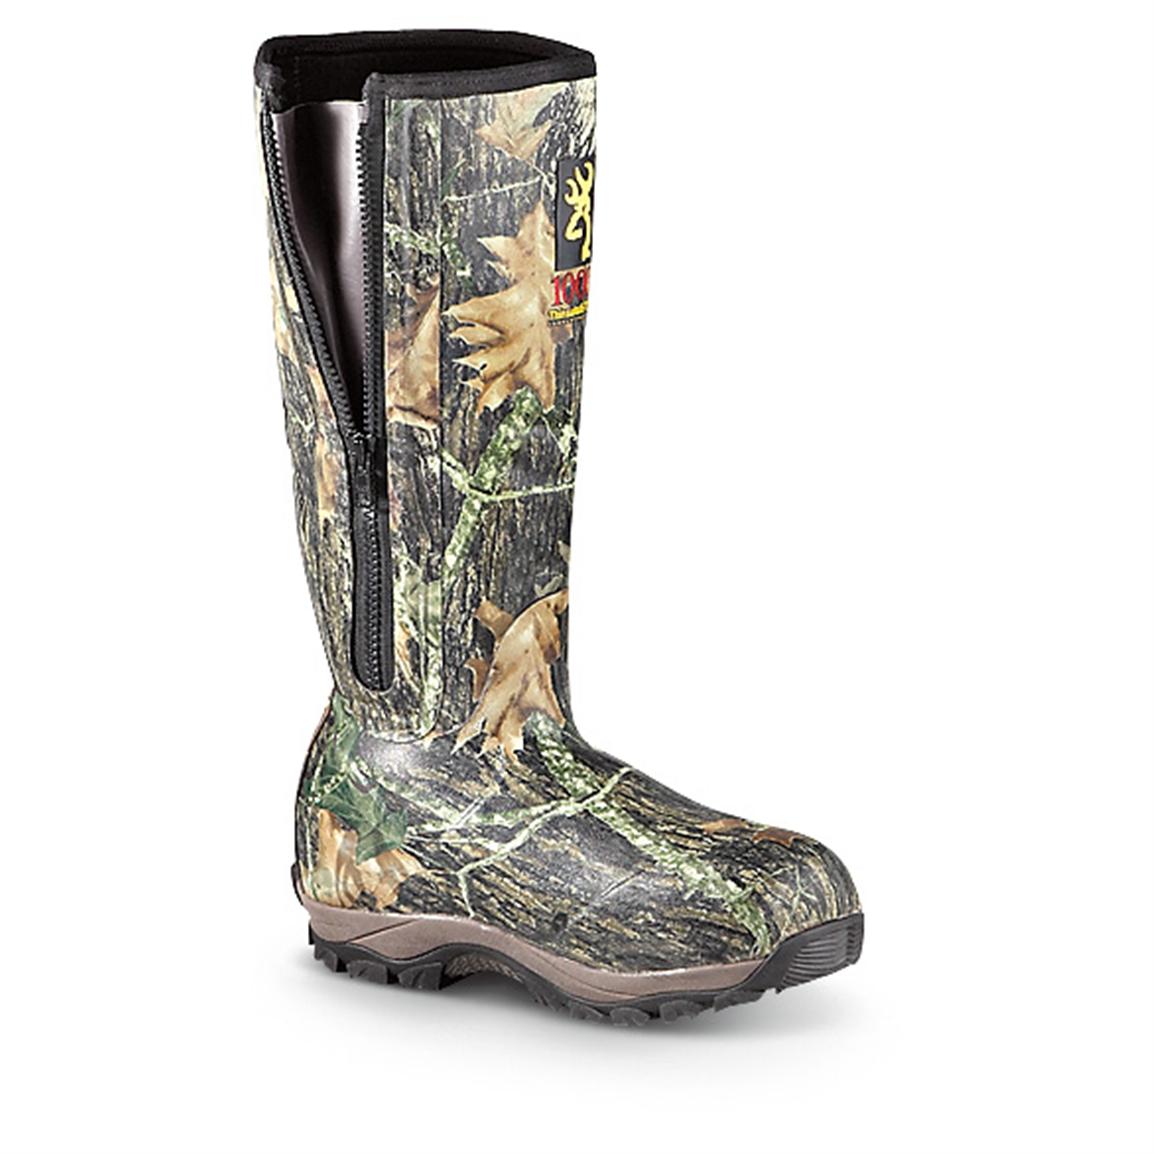 browning rubber hunting boots